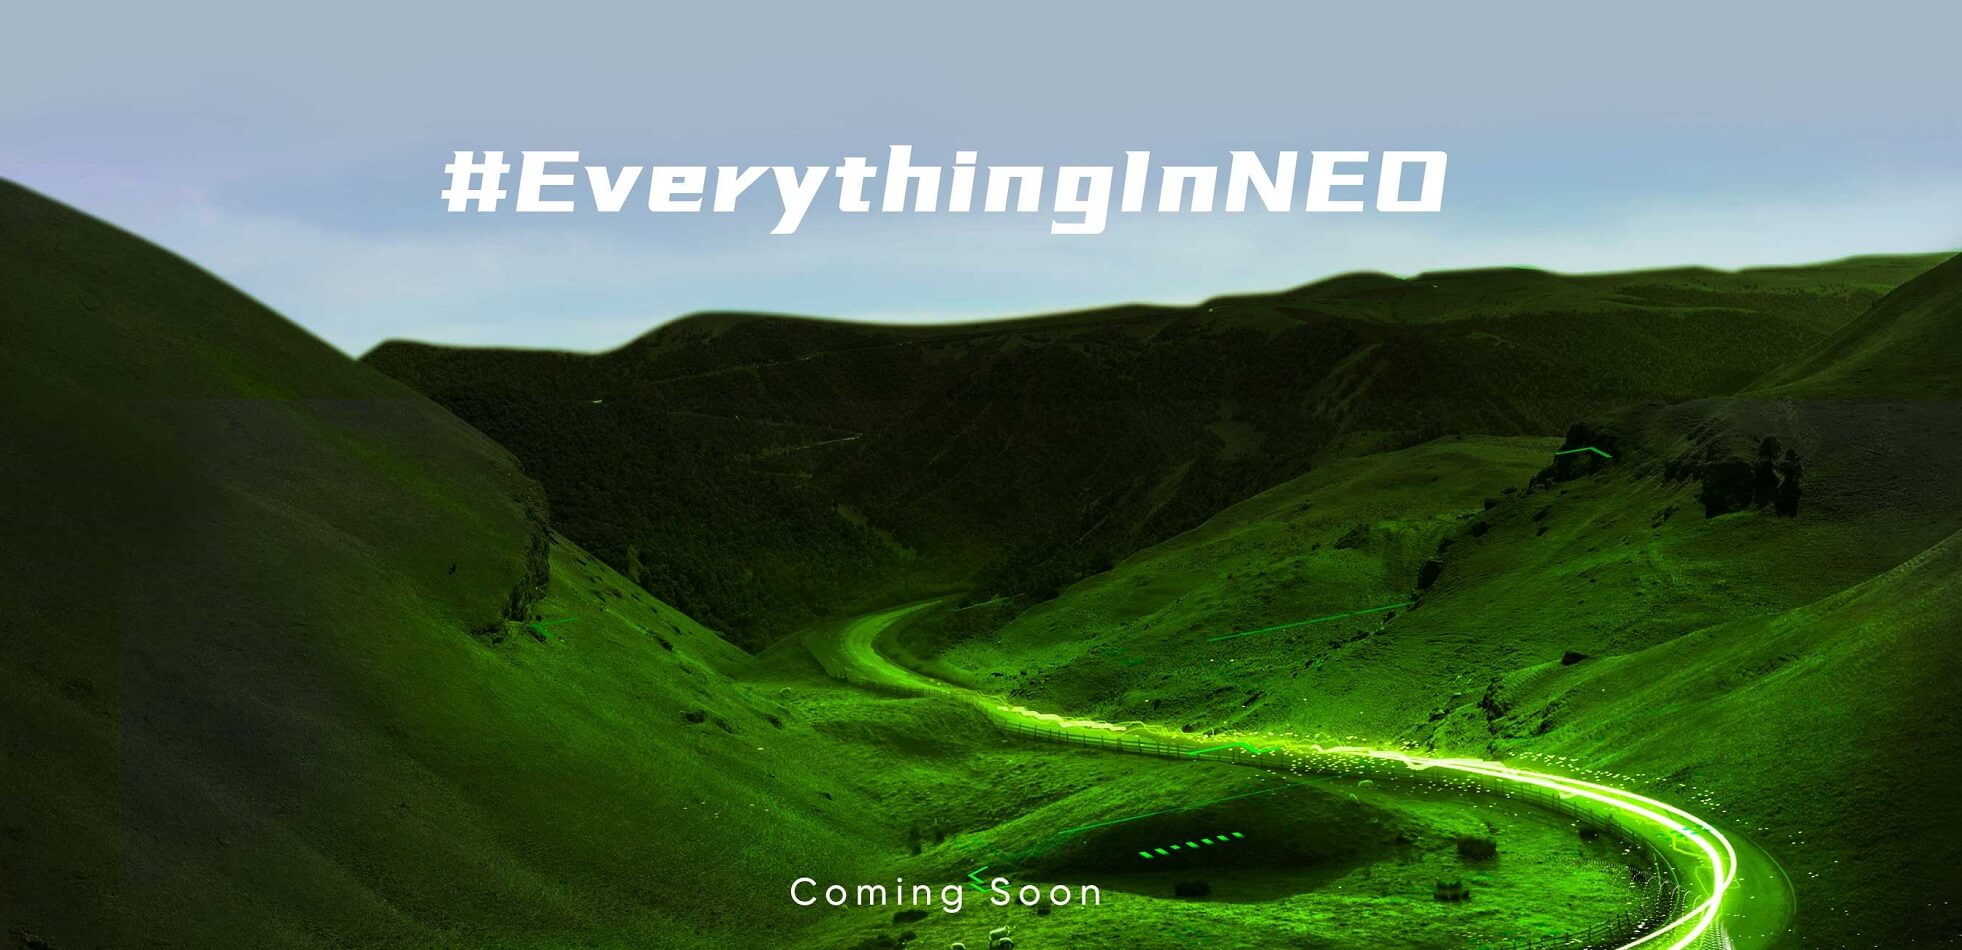 realme GT Neo 2 launch India Soon